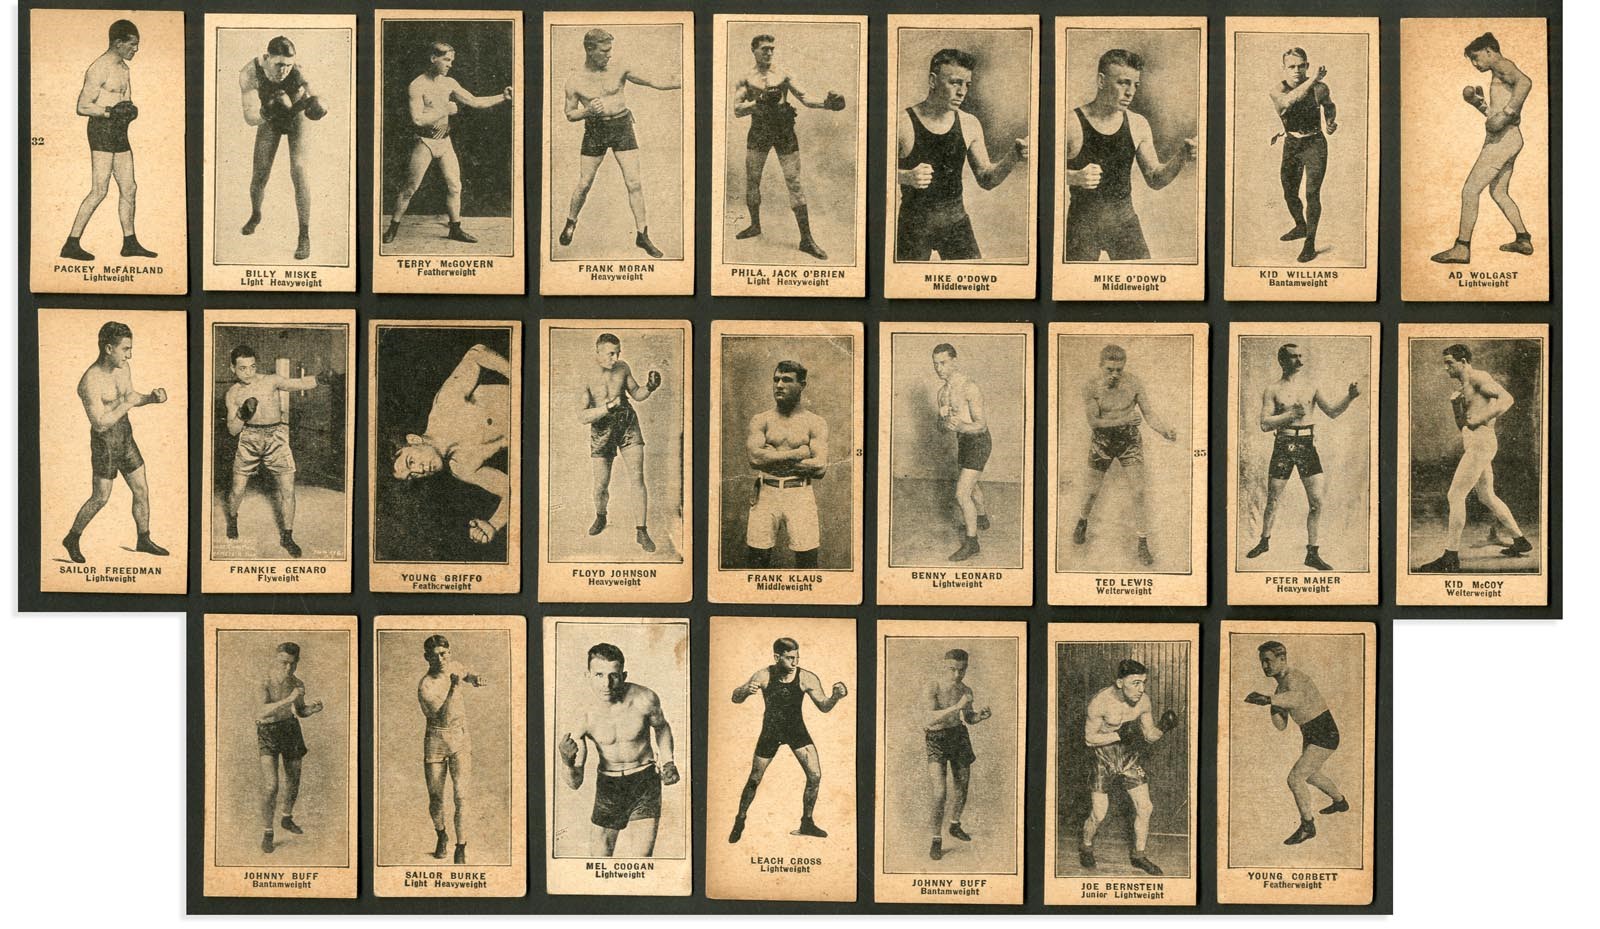 Boxing Cards - Various 1923 W580 Boxing Cards w/ Young Corbett (25)